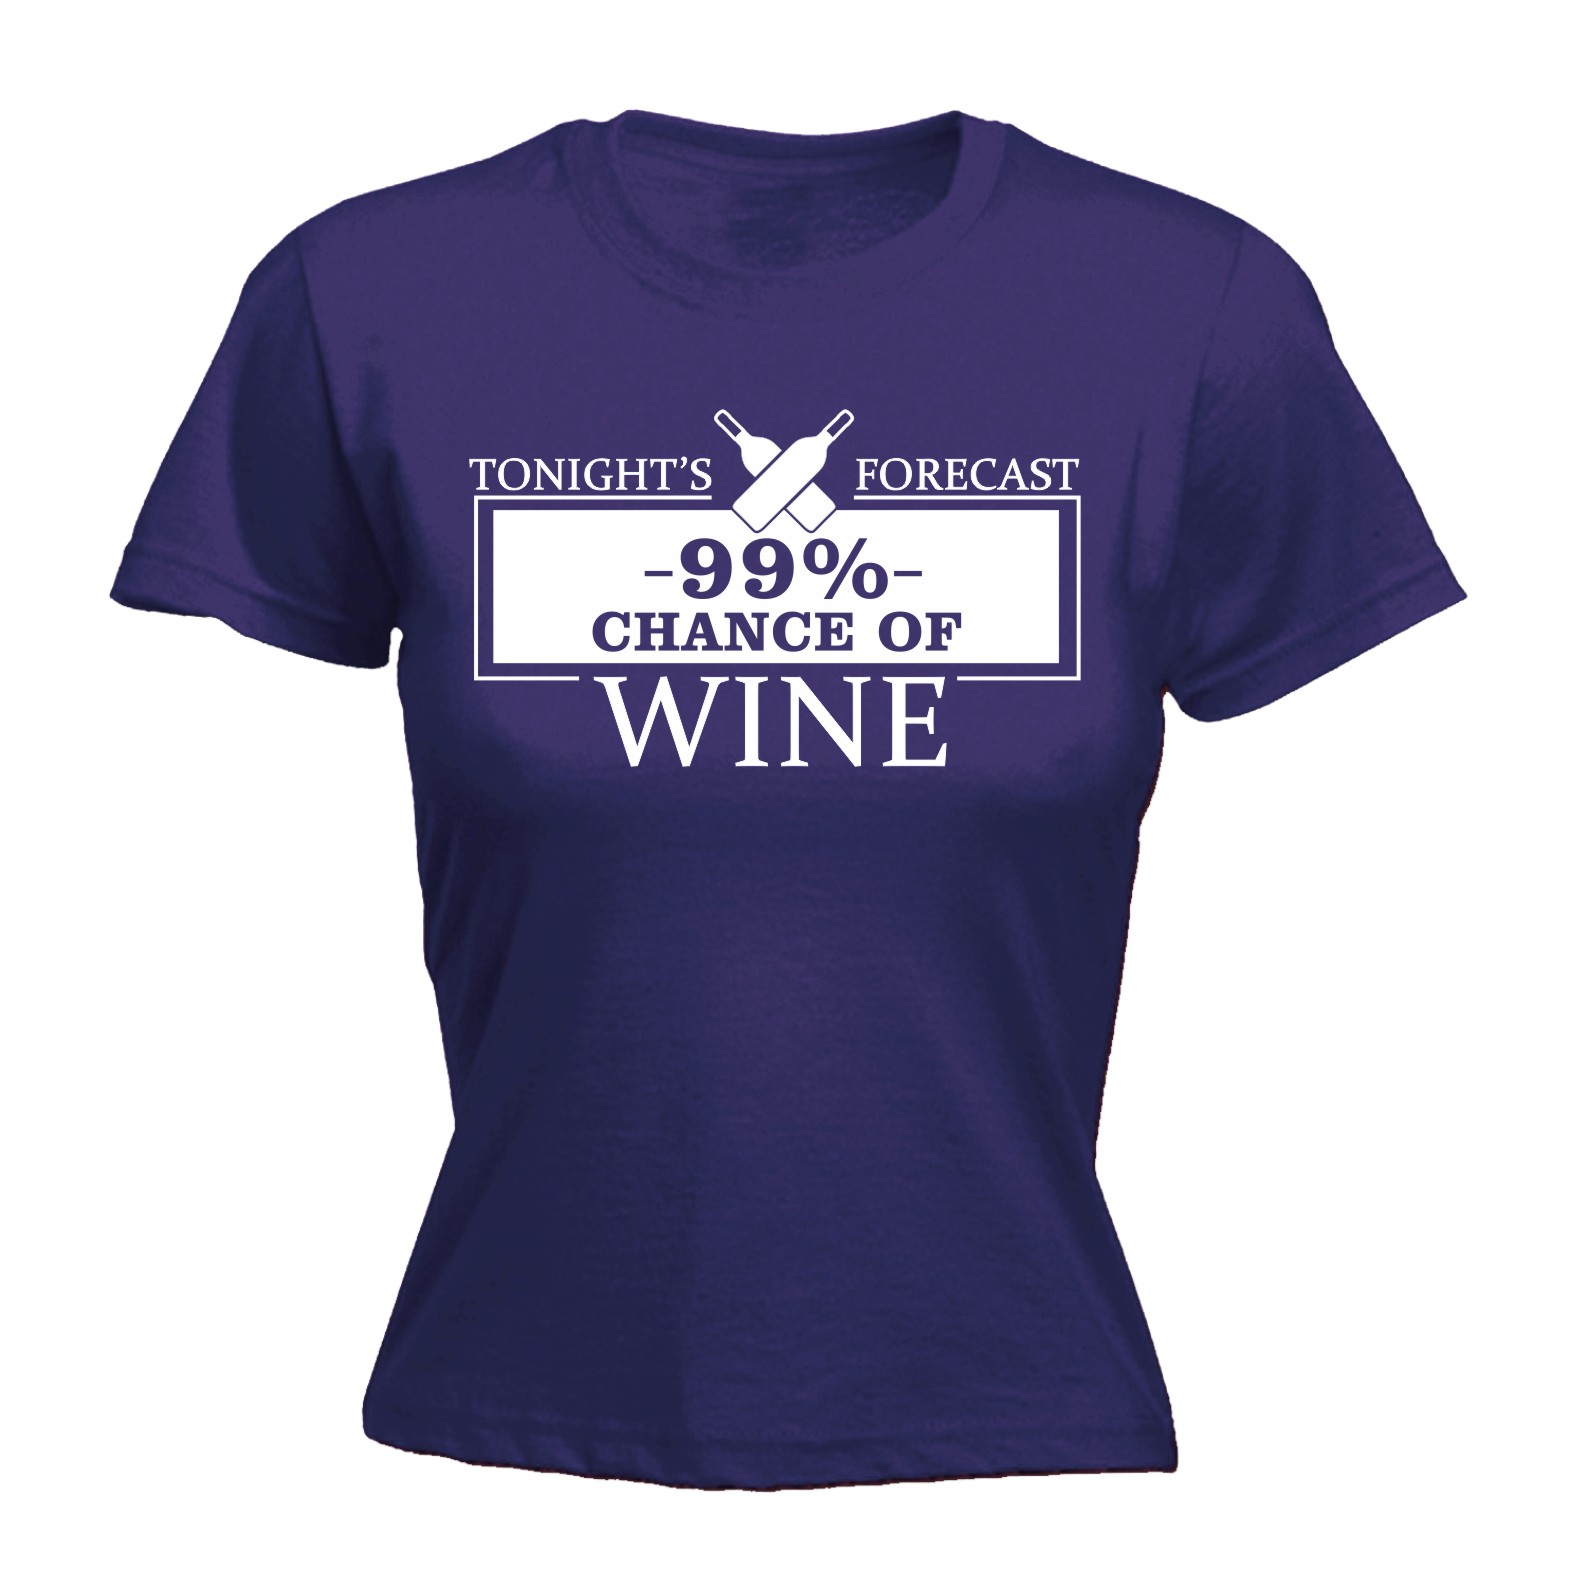 thumbnail 6 - Tonight Forecast 99% Chance Of Wine Funny Joke Adult Humour FITTED T-SHIRT Cool